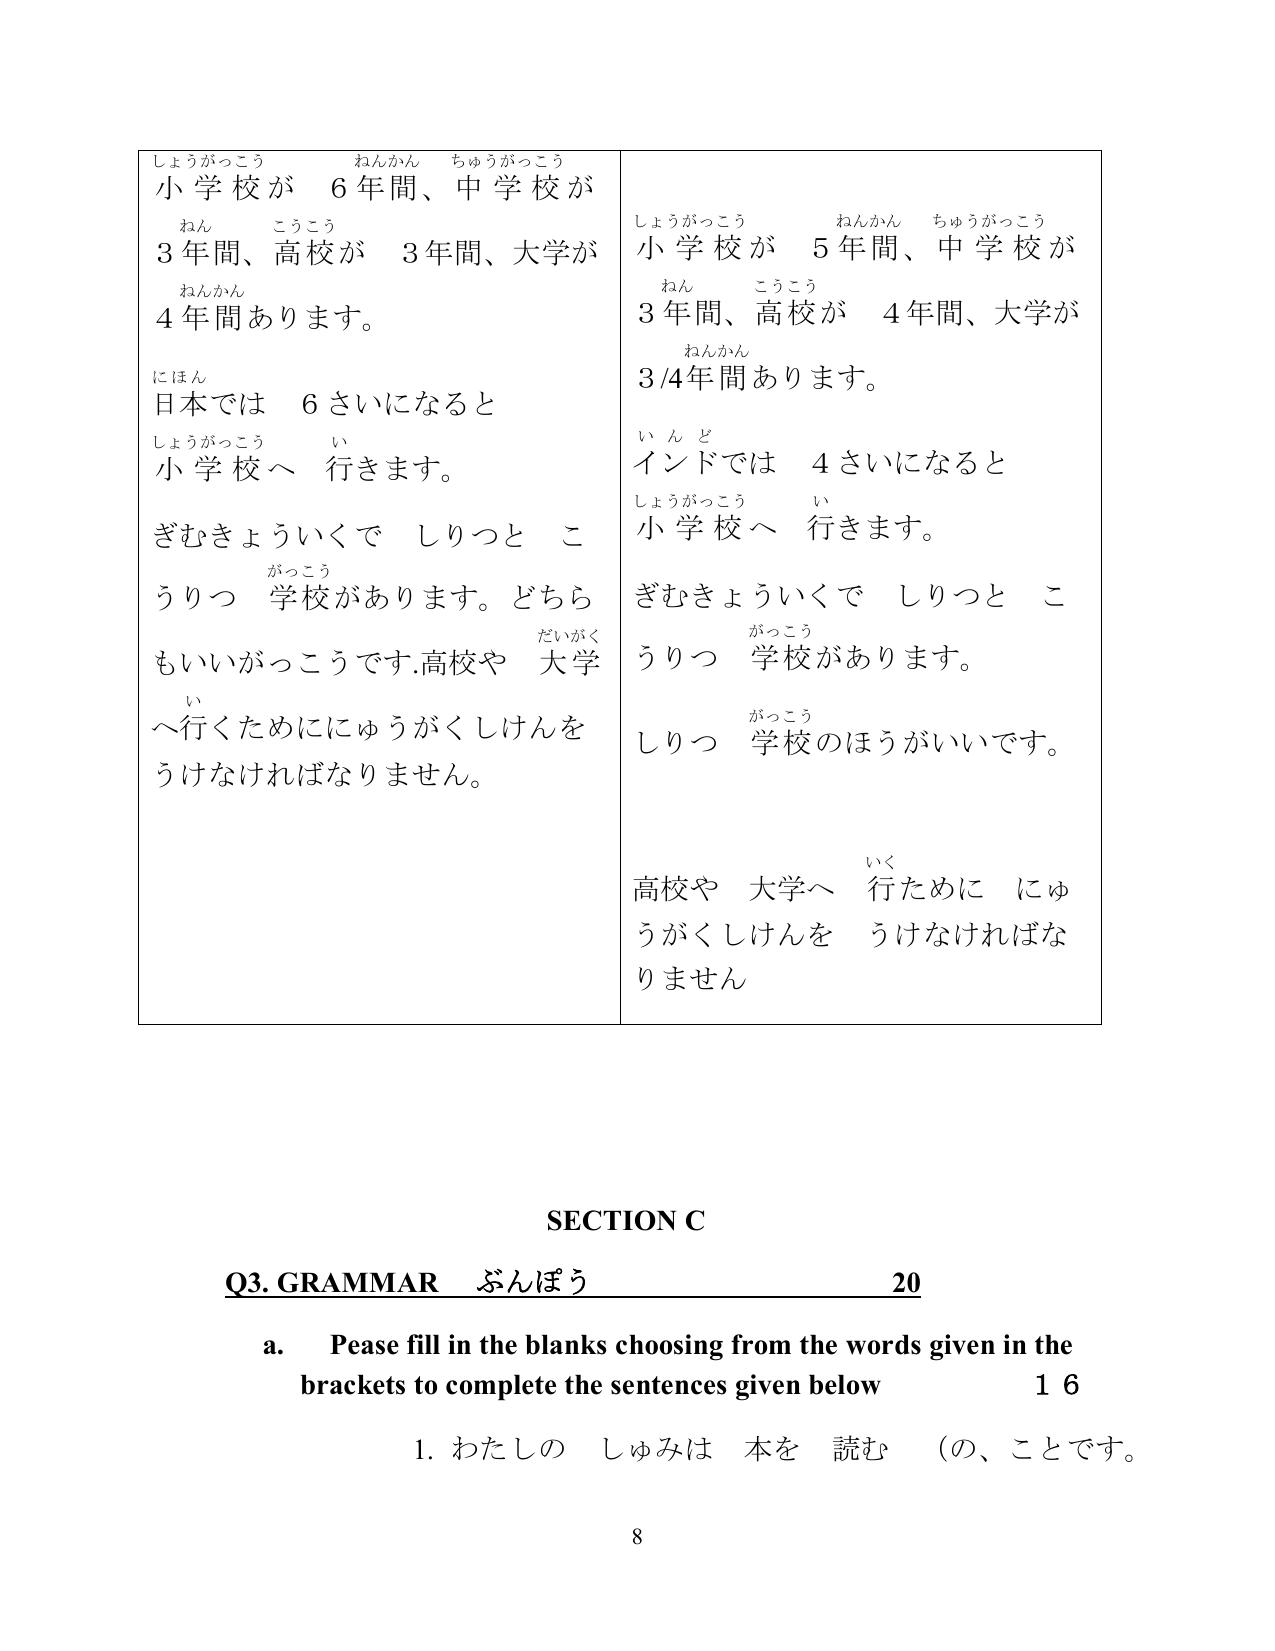 CBSE Class 12 Japanese -Sample Paper 2019-20 - Page 8